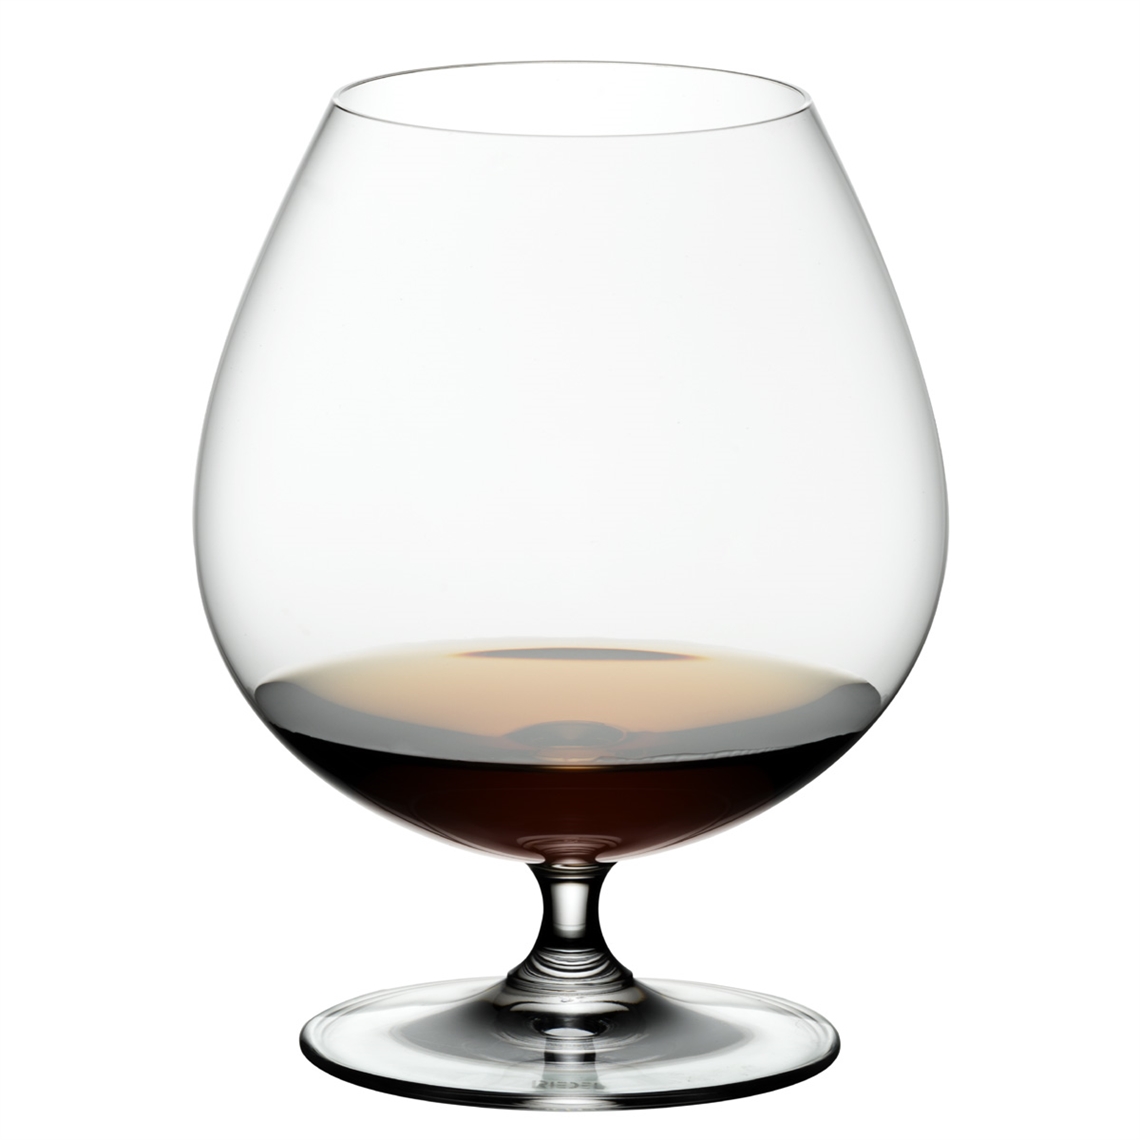 View more which riedel wine glass to choose from our Spirit Glasses range